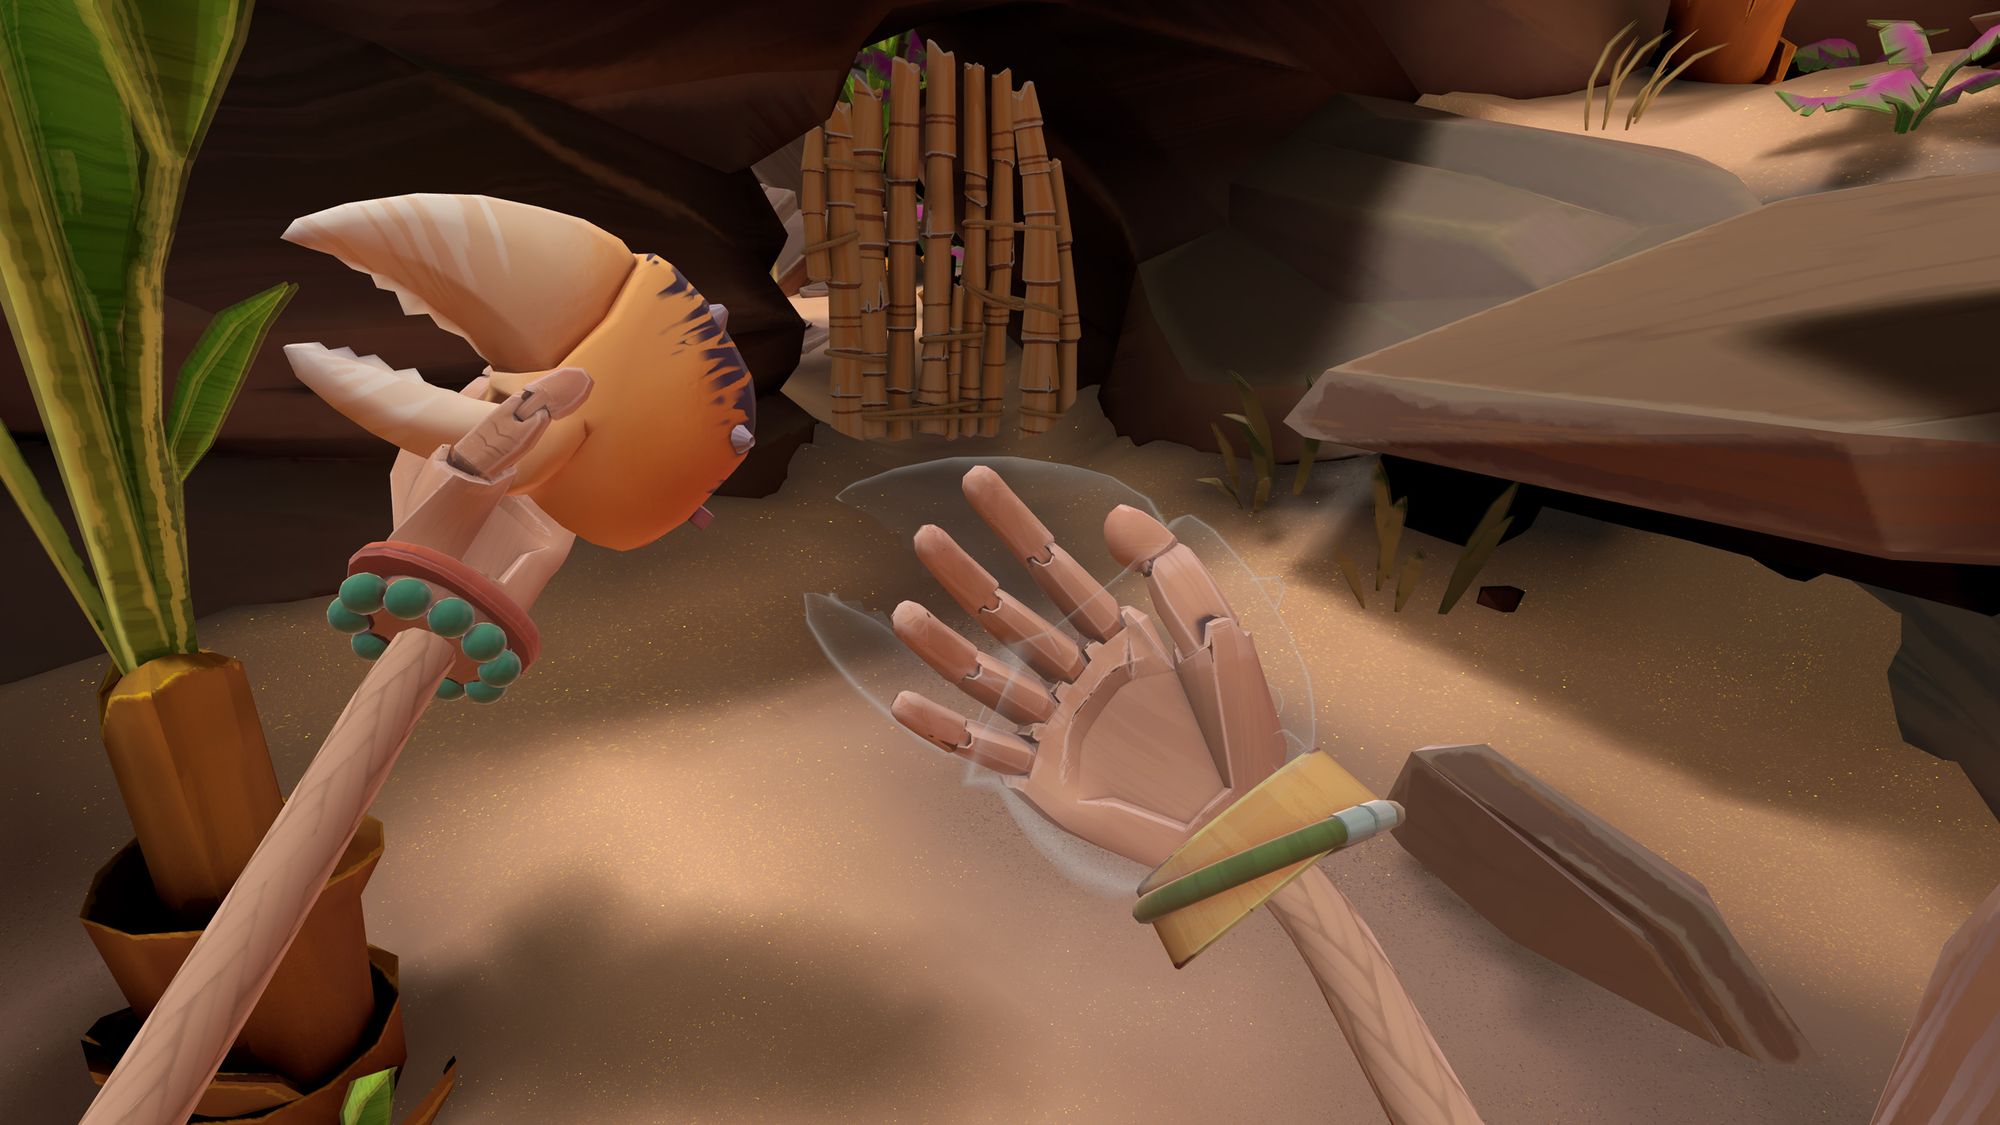 Attaching a crab's claw to a hand on a beach in the virtual reality game Another Fisherman's Tale.